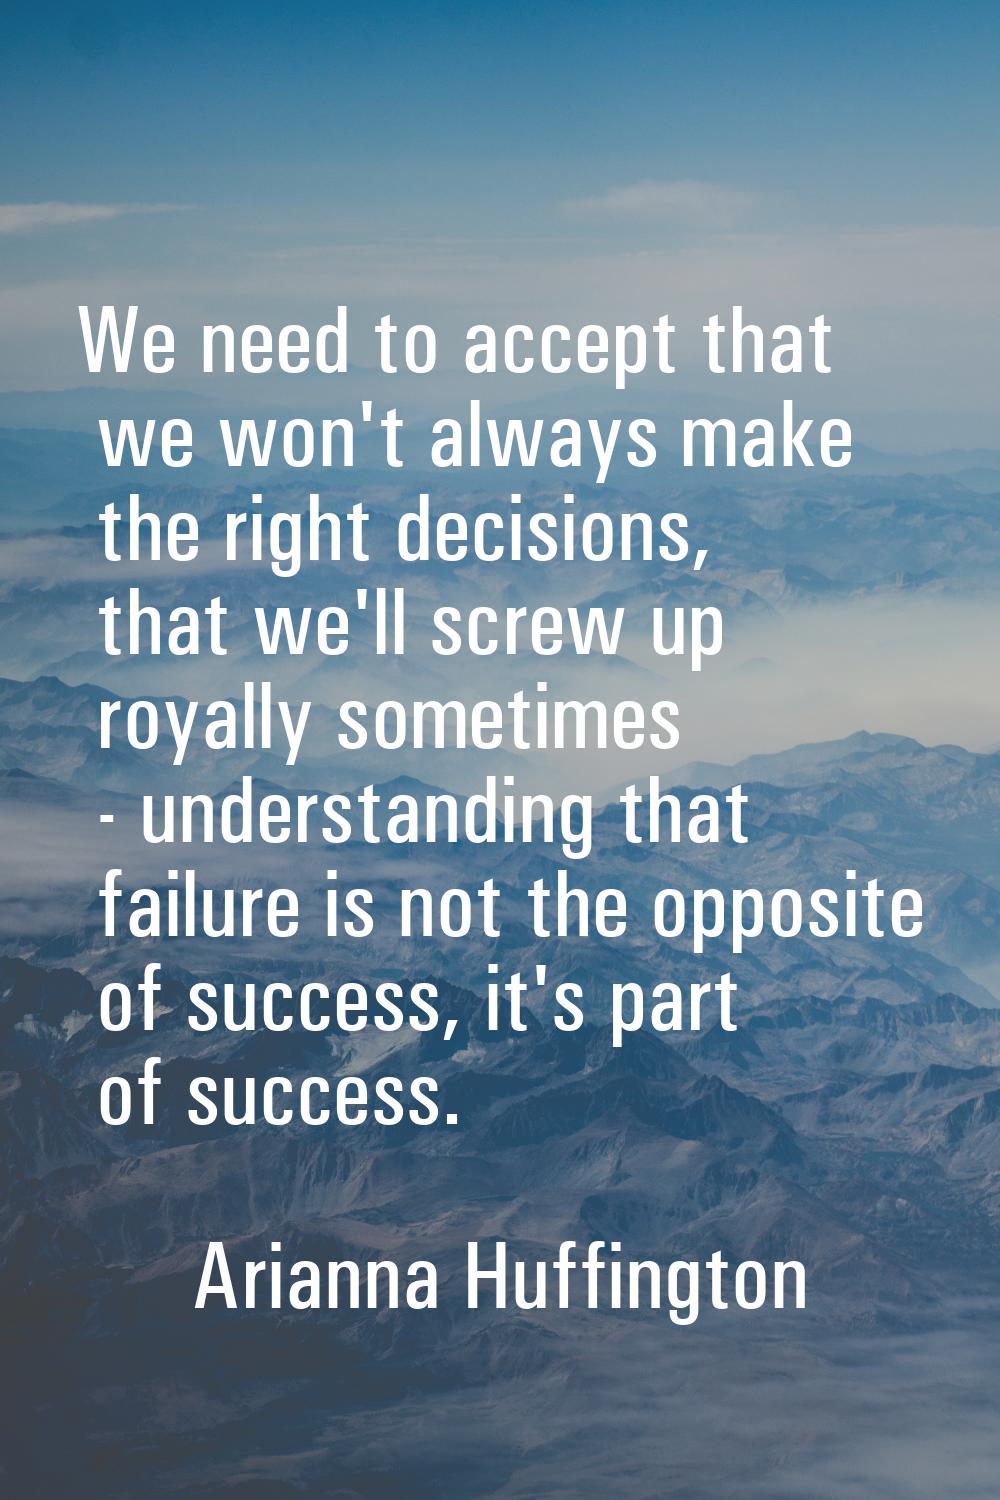 We need to accept that we won't always make the right decisions, that we'll screw up royally someti